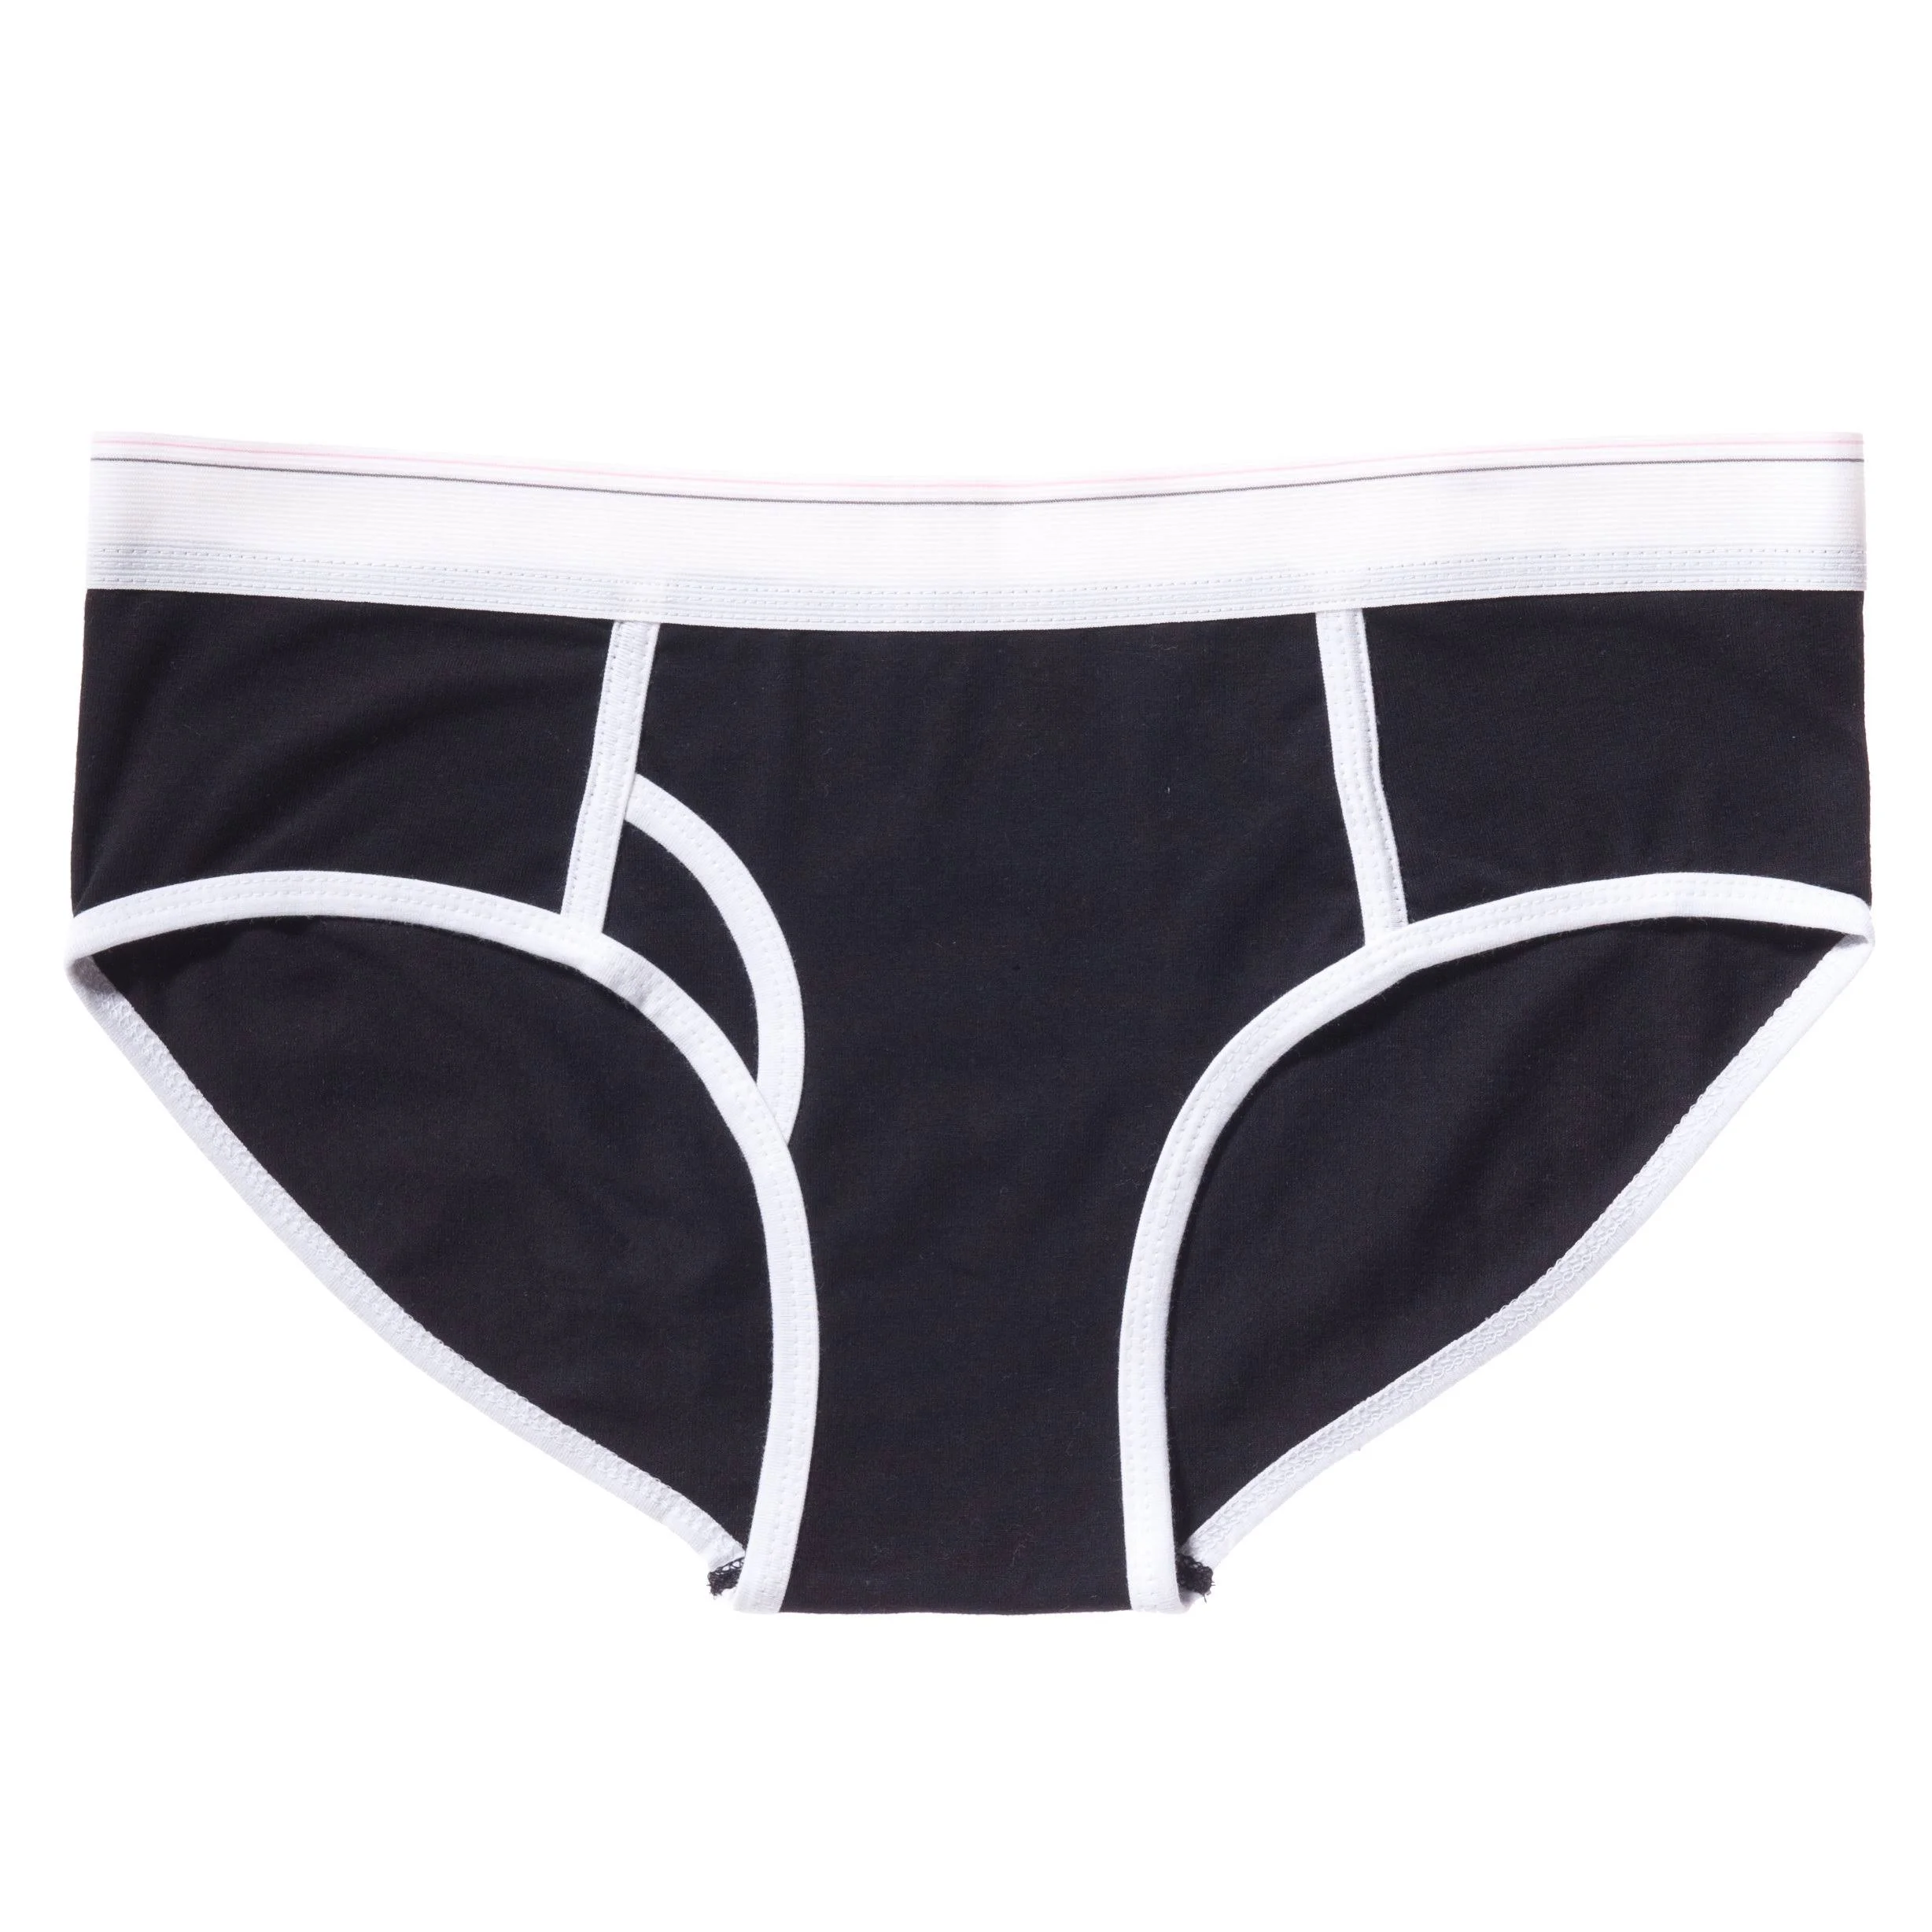 Wholesale Underwear For Women Soft Cotton Knickers Ladies Mid Rise Briefs Basic Panties Manufacturer In Bangladesh